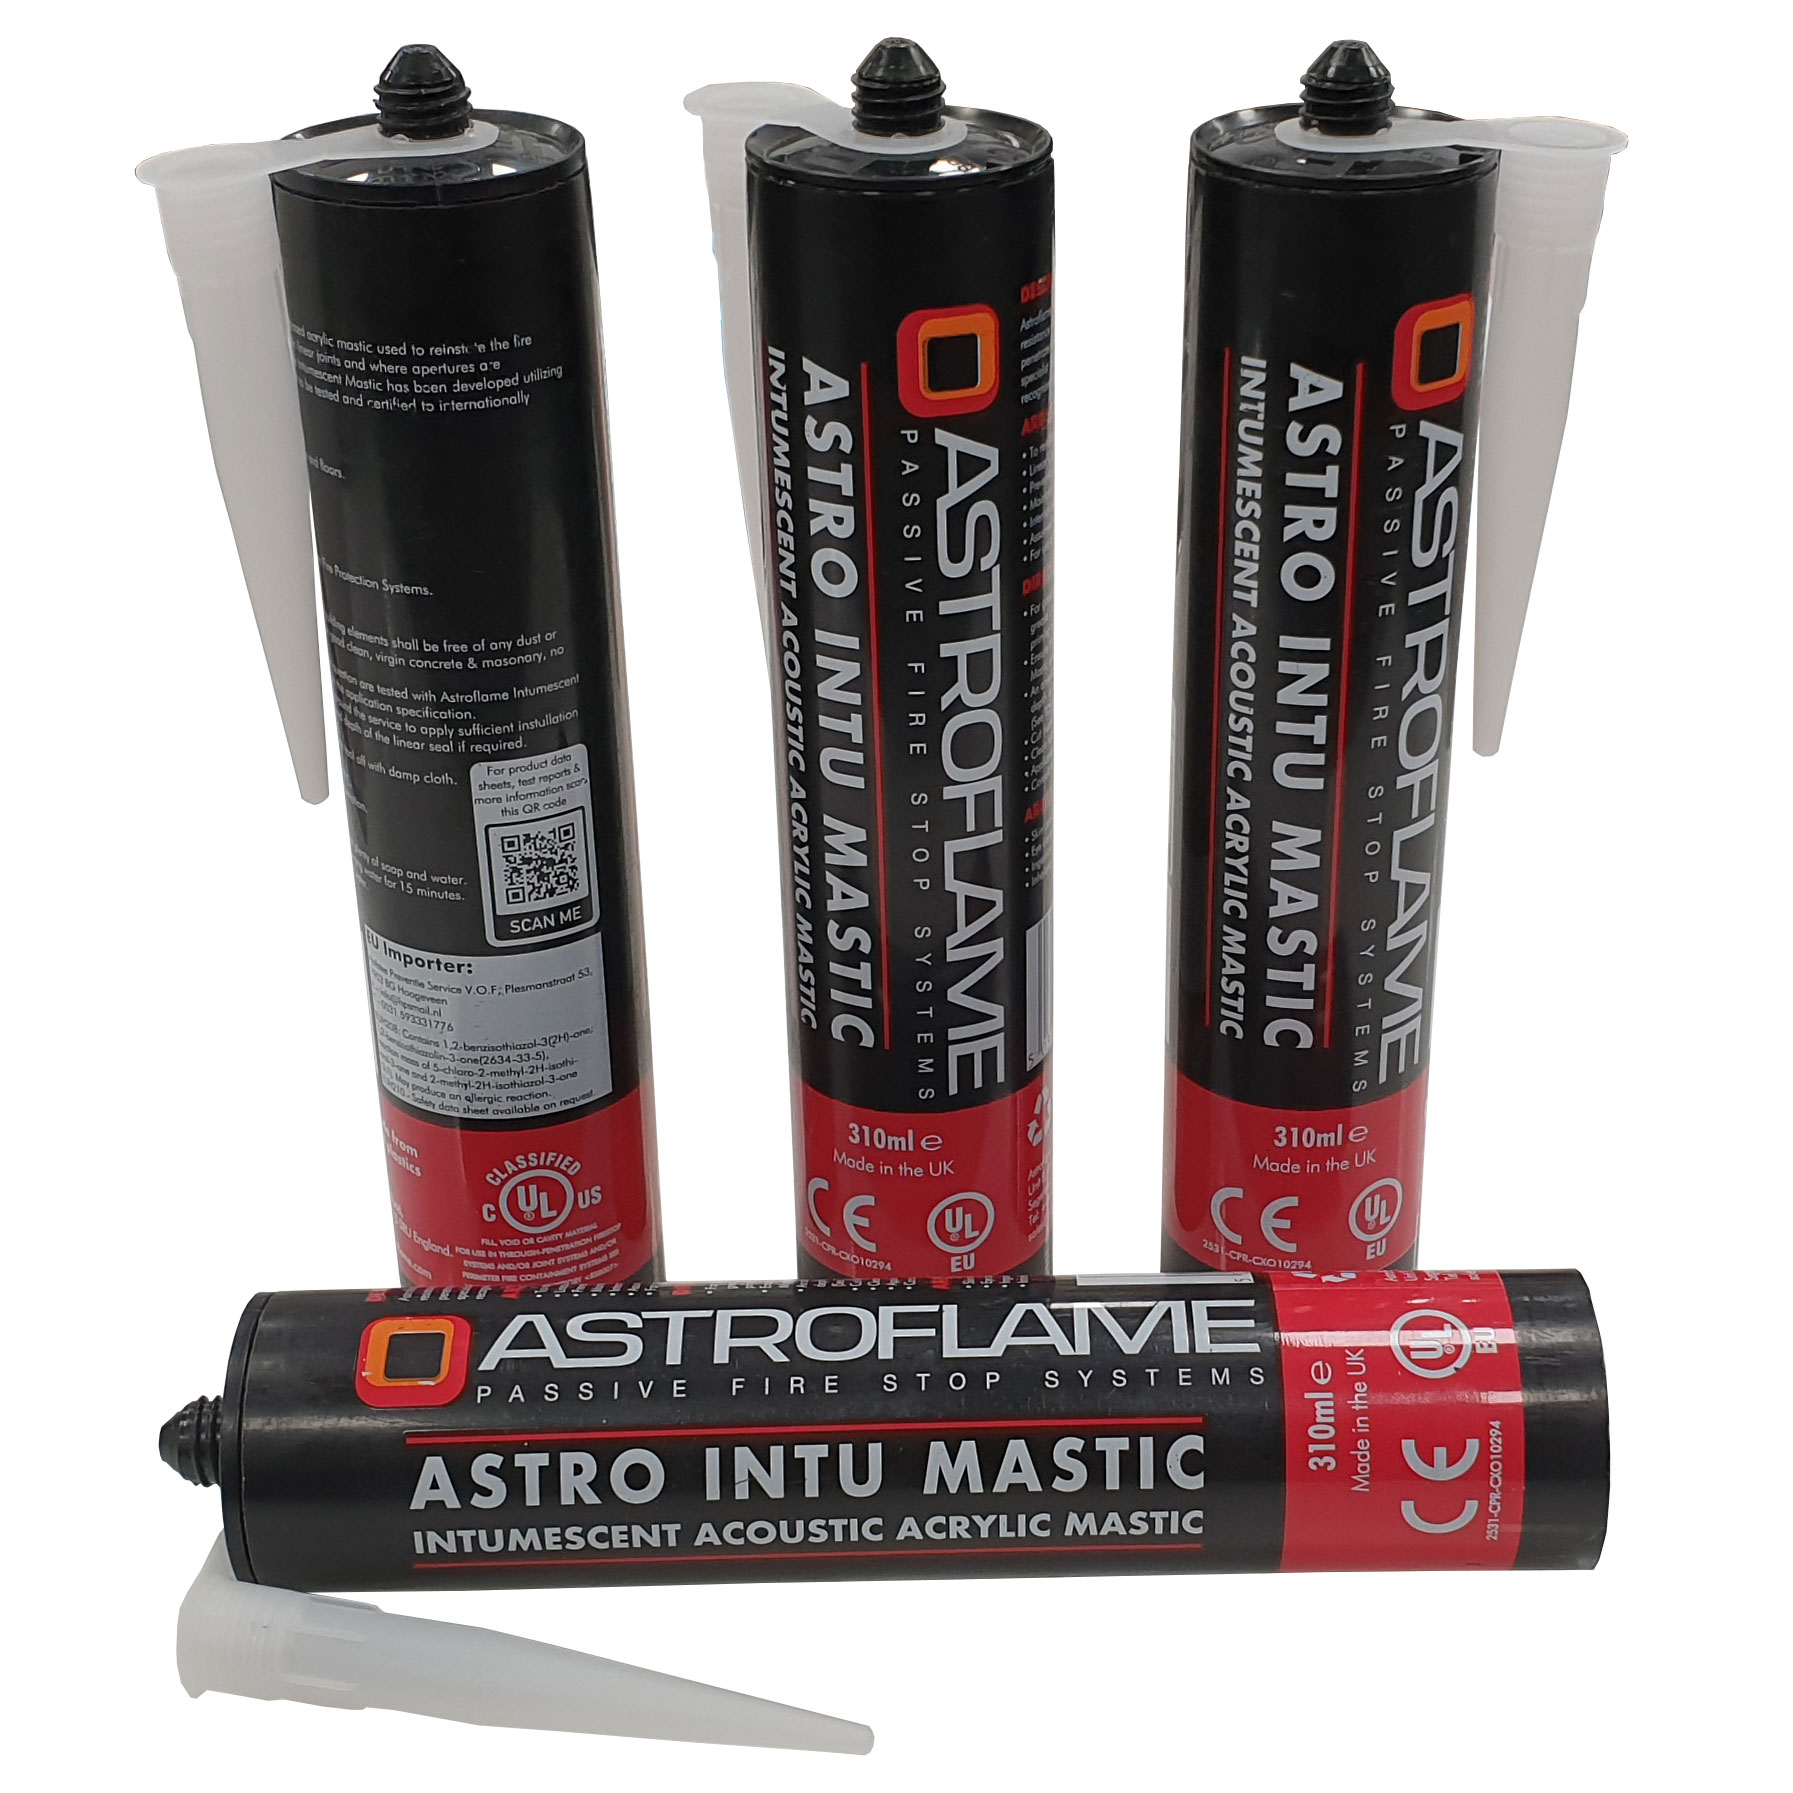 Fire Rated Mastic - CE